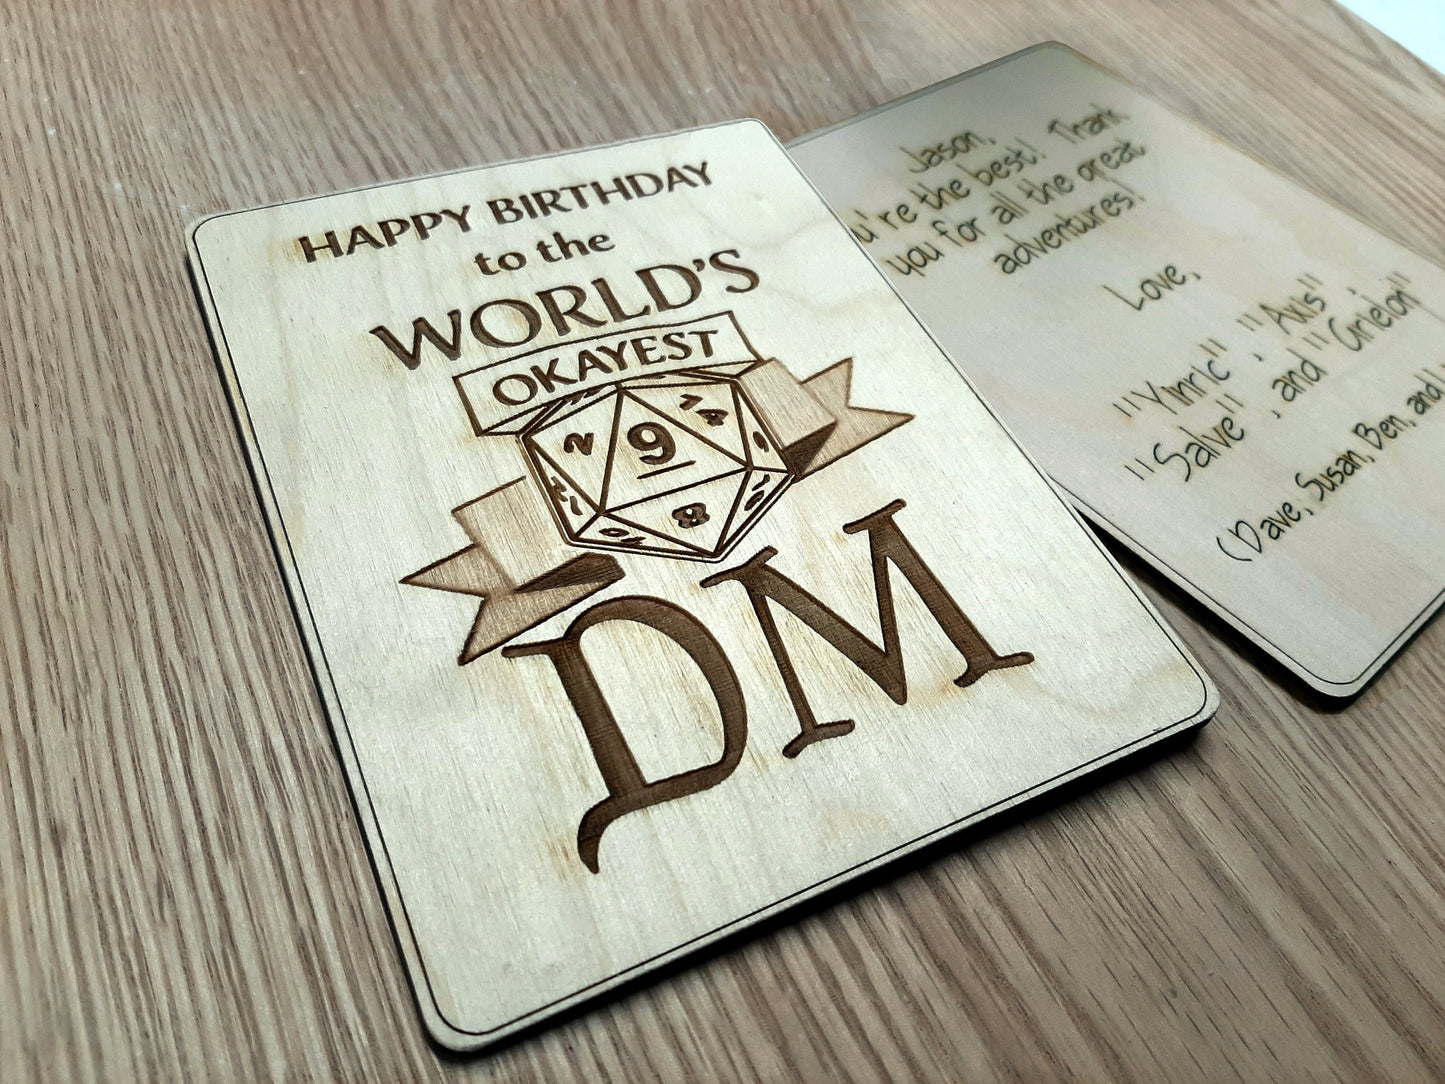 Happy Birthday to the World's OKAYEST DM - Birthday Card - Humorous birthday card, engraved wood, rpg gamer gift, role-playing games d&d dnd